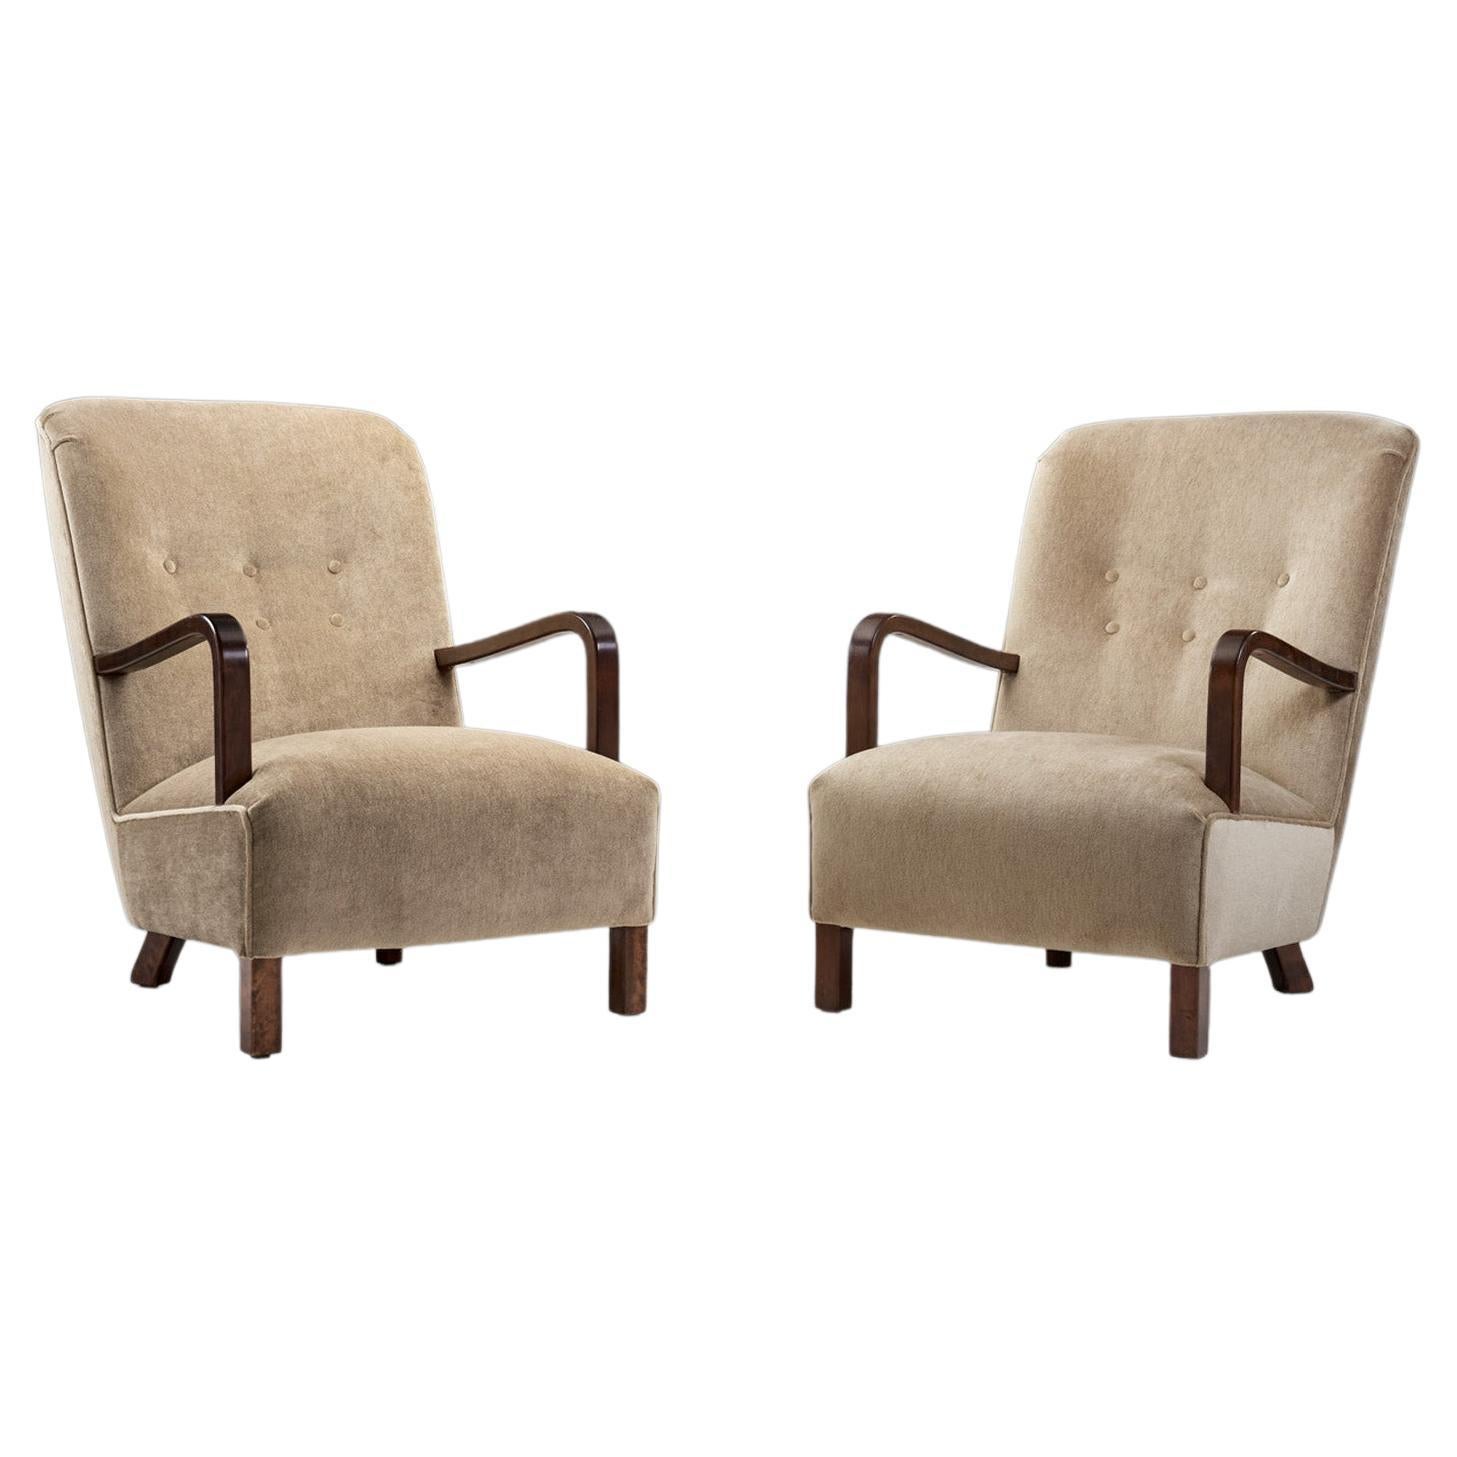 Upholstered Lounge Chairs with Sculptural Arms, Europe ca 1940s For Sale